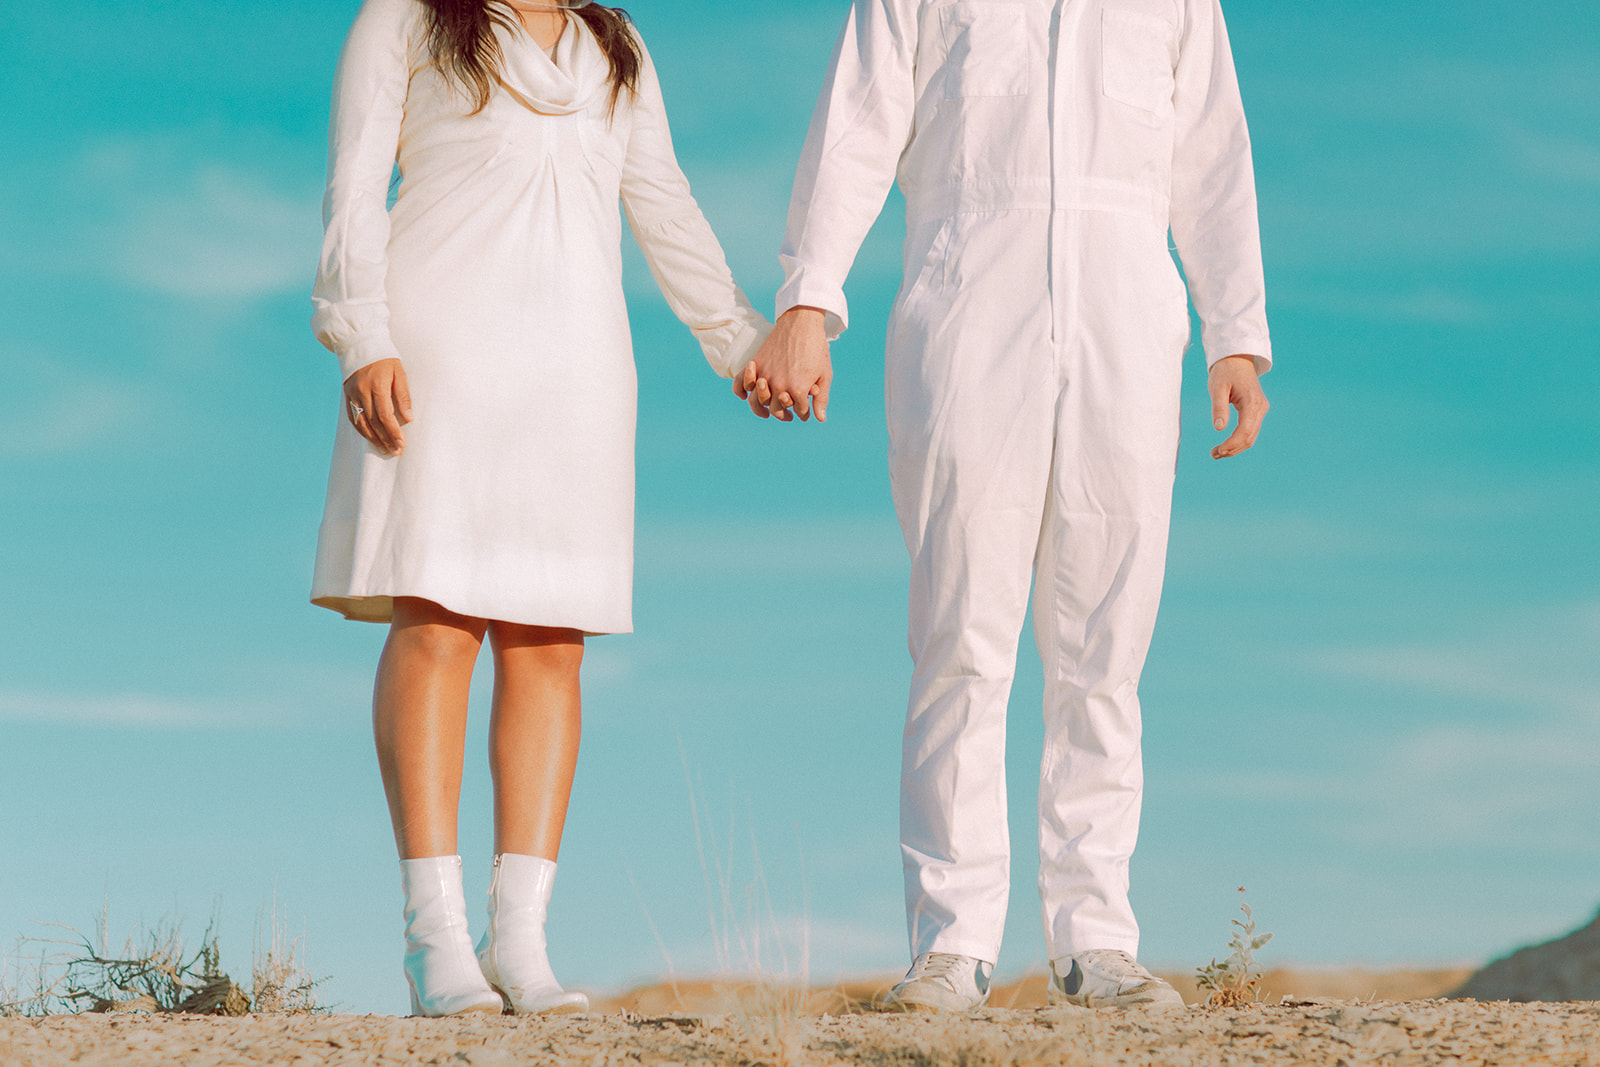 A man and woman hold hands while wearing all white outfits out in nature.